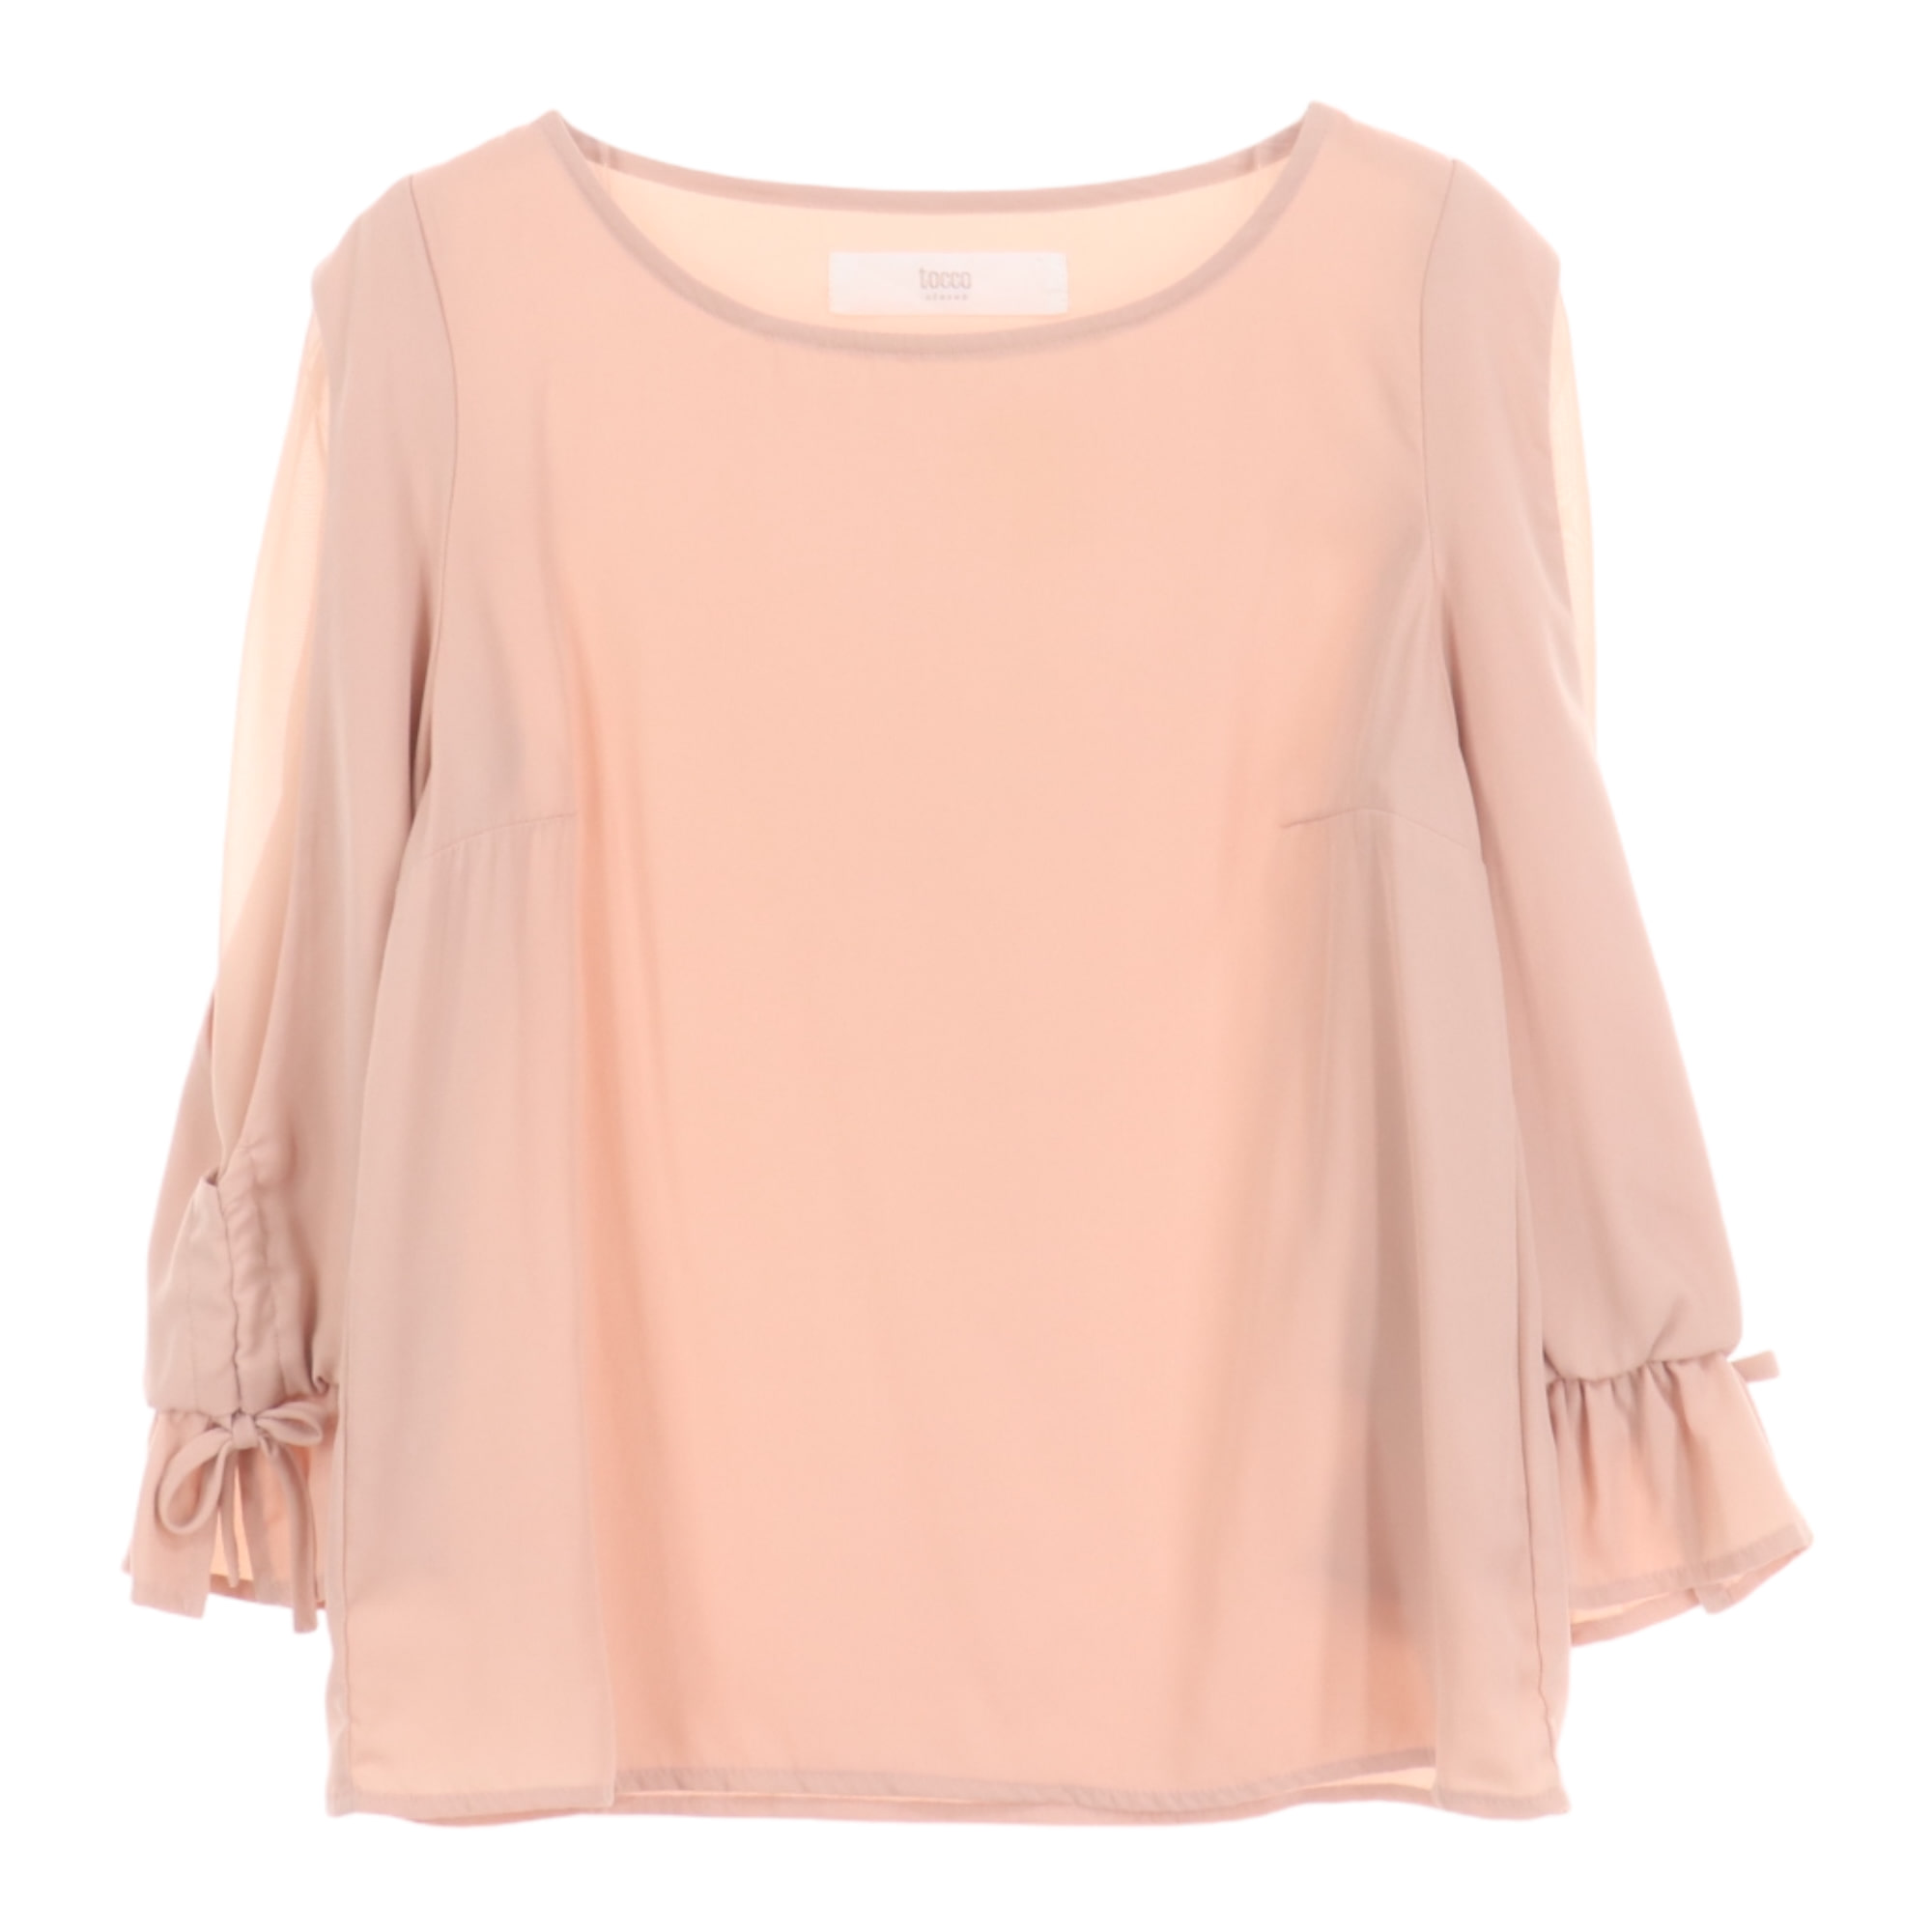 Tocco,Blouse